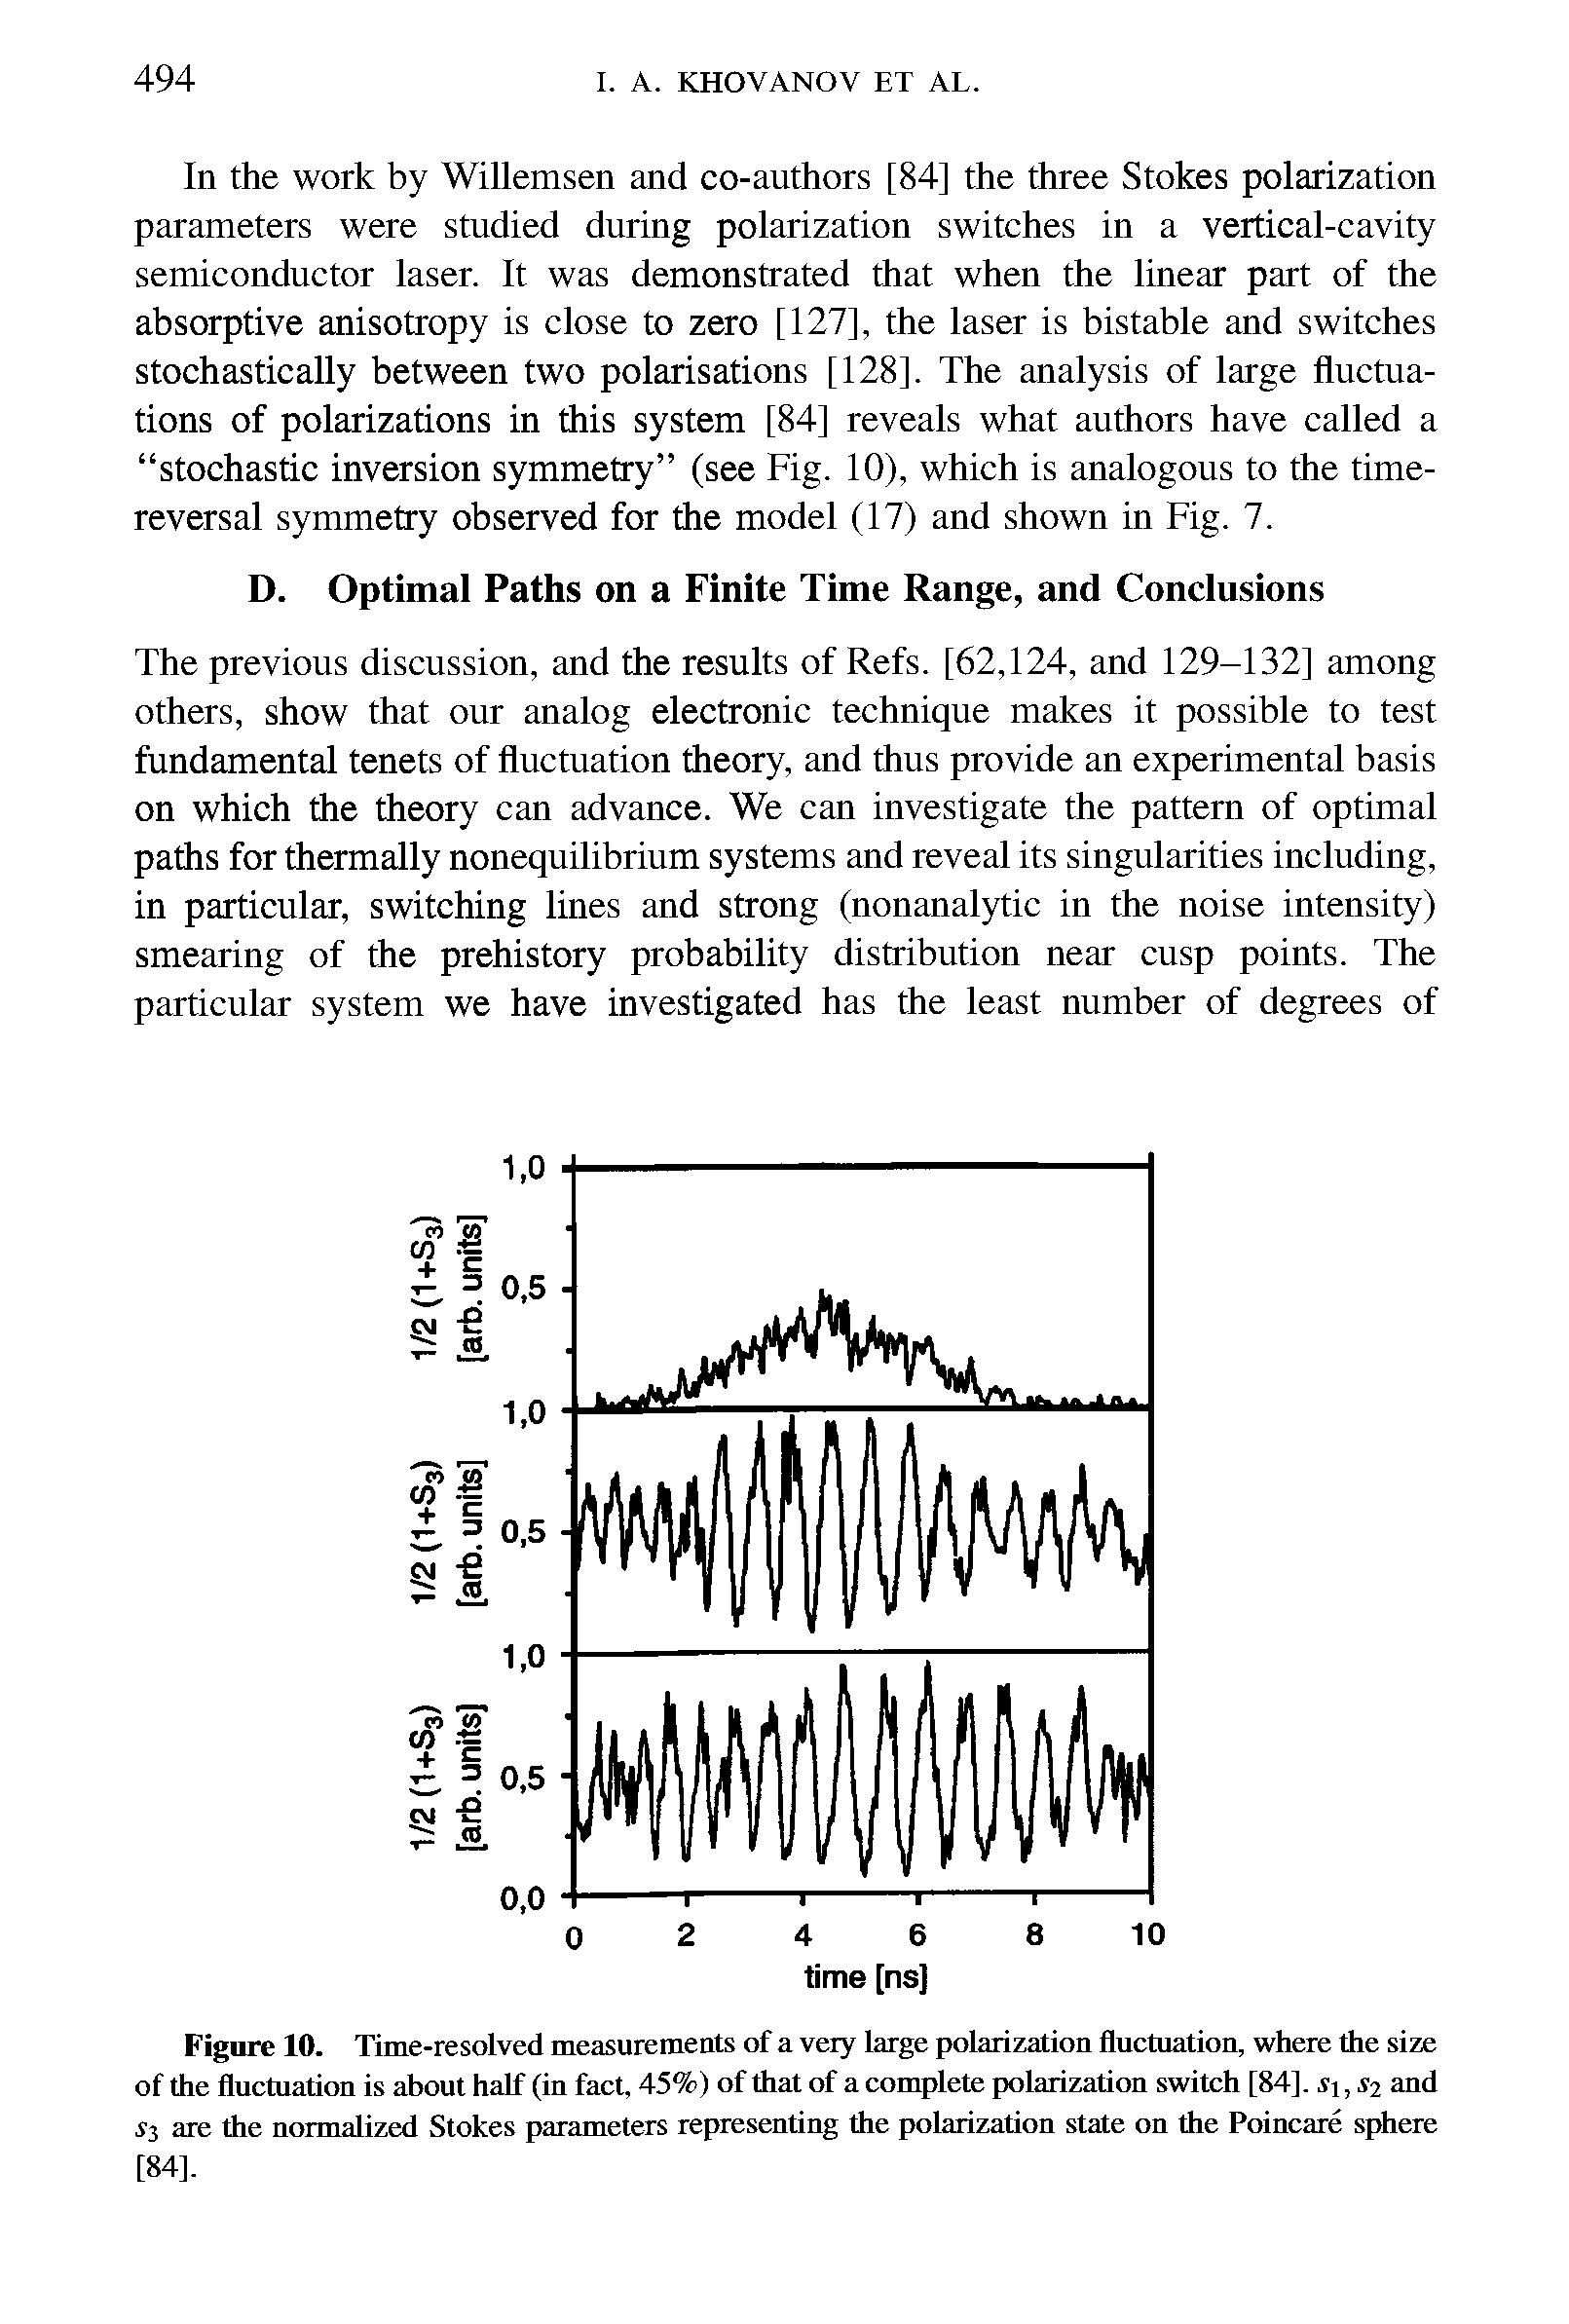 Figure 10. Time-resolved measurements of a very large polarization fluctuation, where the size of the fluctuation is about half (in fact, 45%) of that of a complete polarization switch [84],, V, , v2 and Si are the normalized Stokes parameters representing the polarization state on the Poincare sphere [84],...